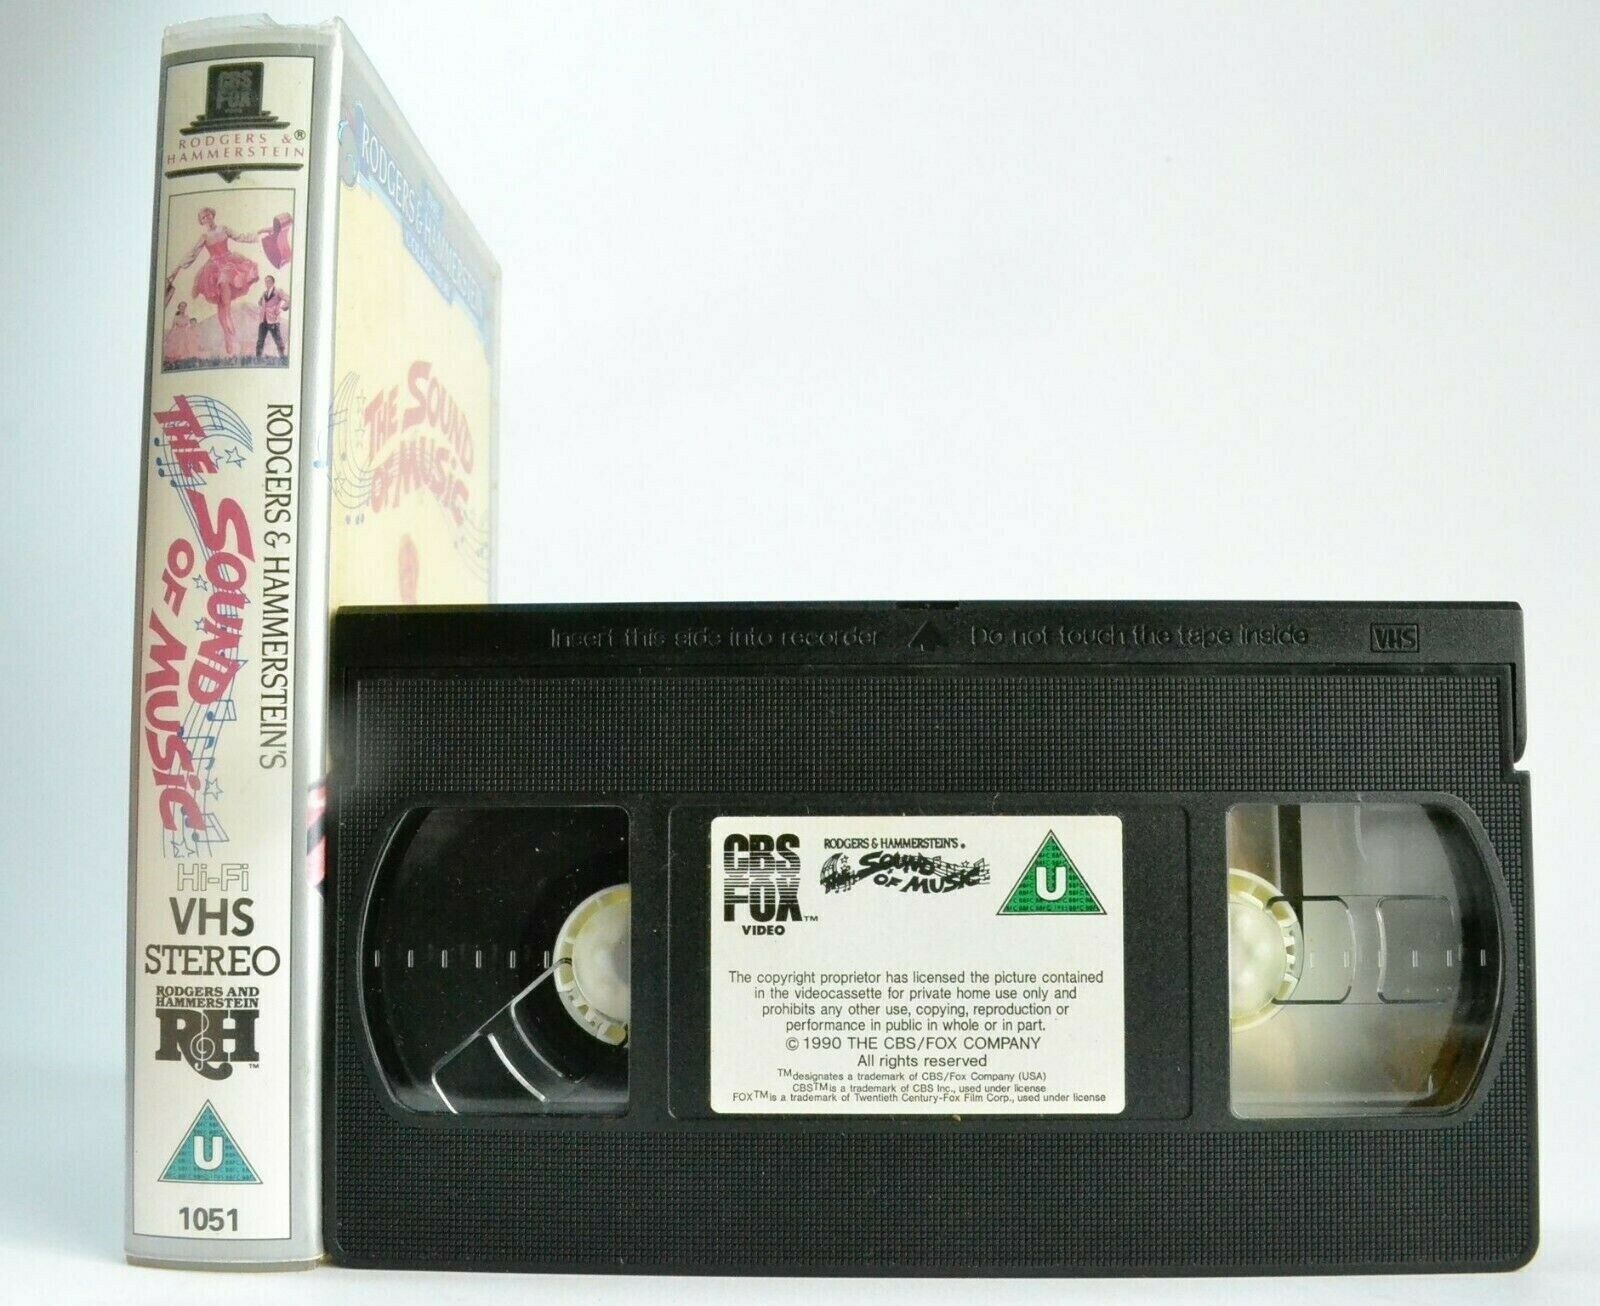 The Sound Of Music (1965) - { Musical } - < Julie Andrews > - Children's - VHS-